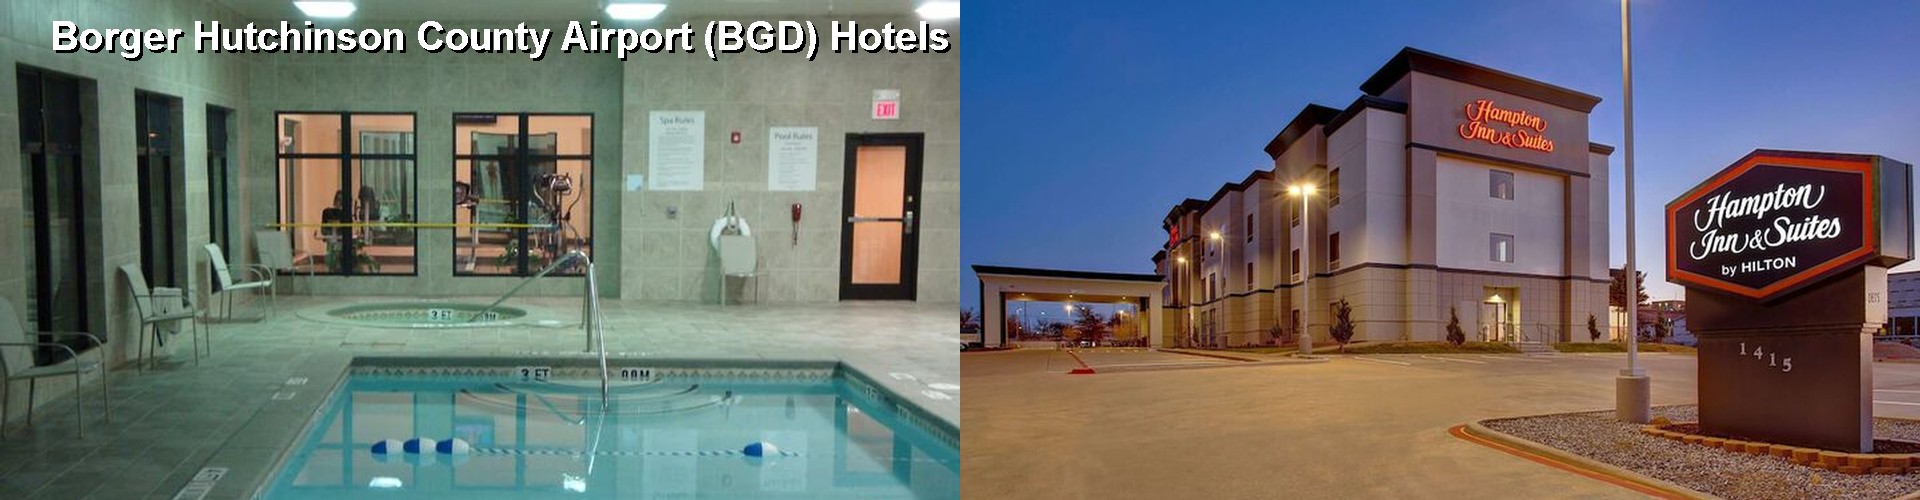 5 Best Hotels near Borger Hutchinson County Airport (BGD)